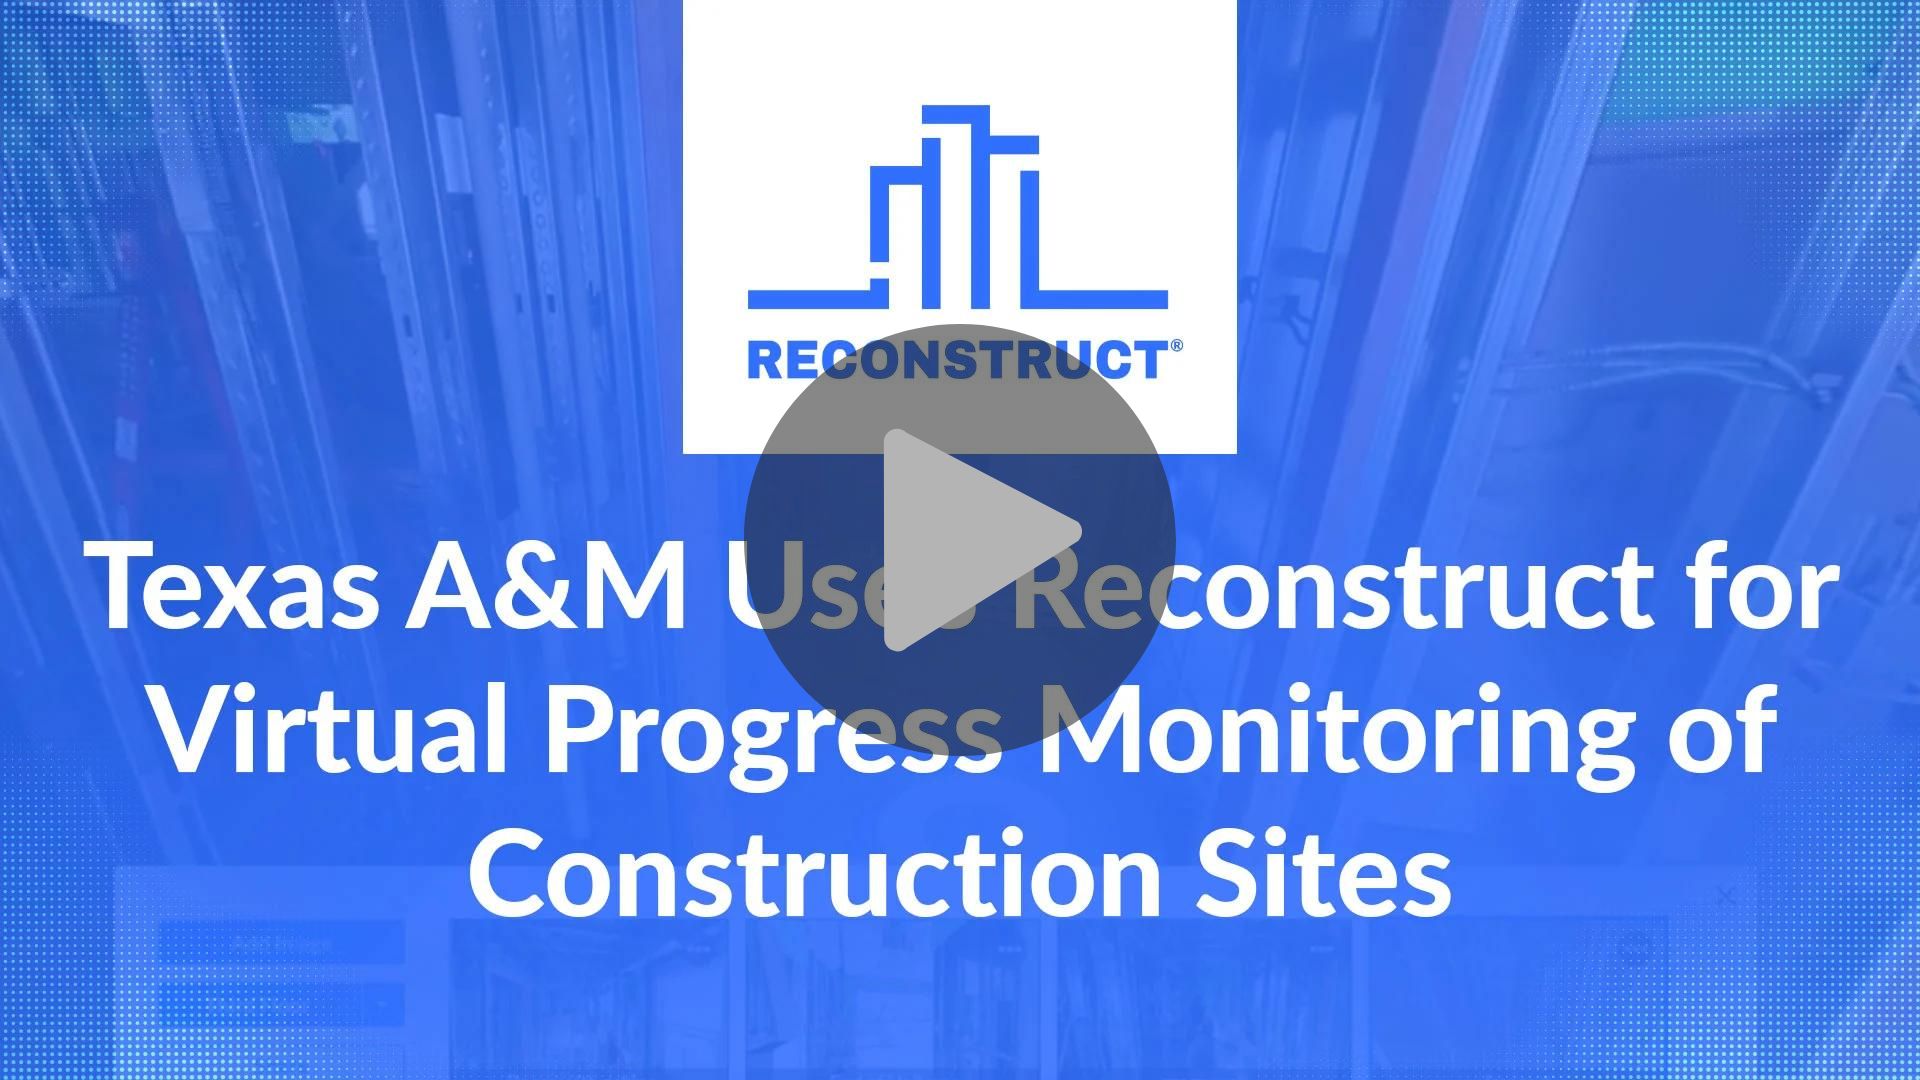 RI-Video-Texas-A&M-Uses-Reconstruct-for-Virtual-Progress-Monitoring-of-Construction-Sites-Thumbnail-Playbutton